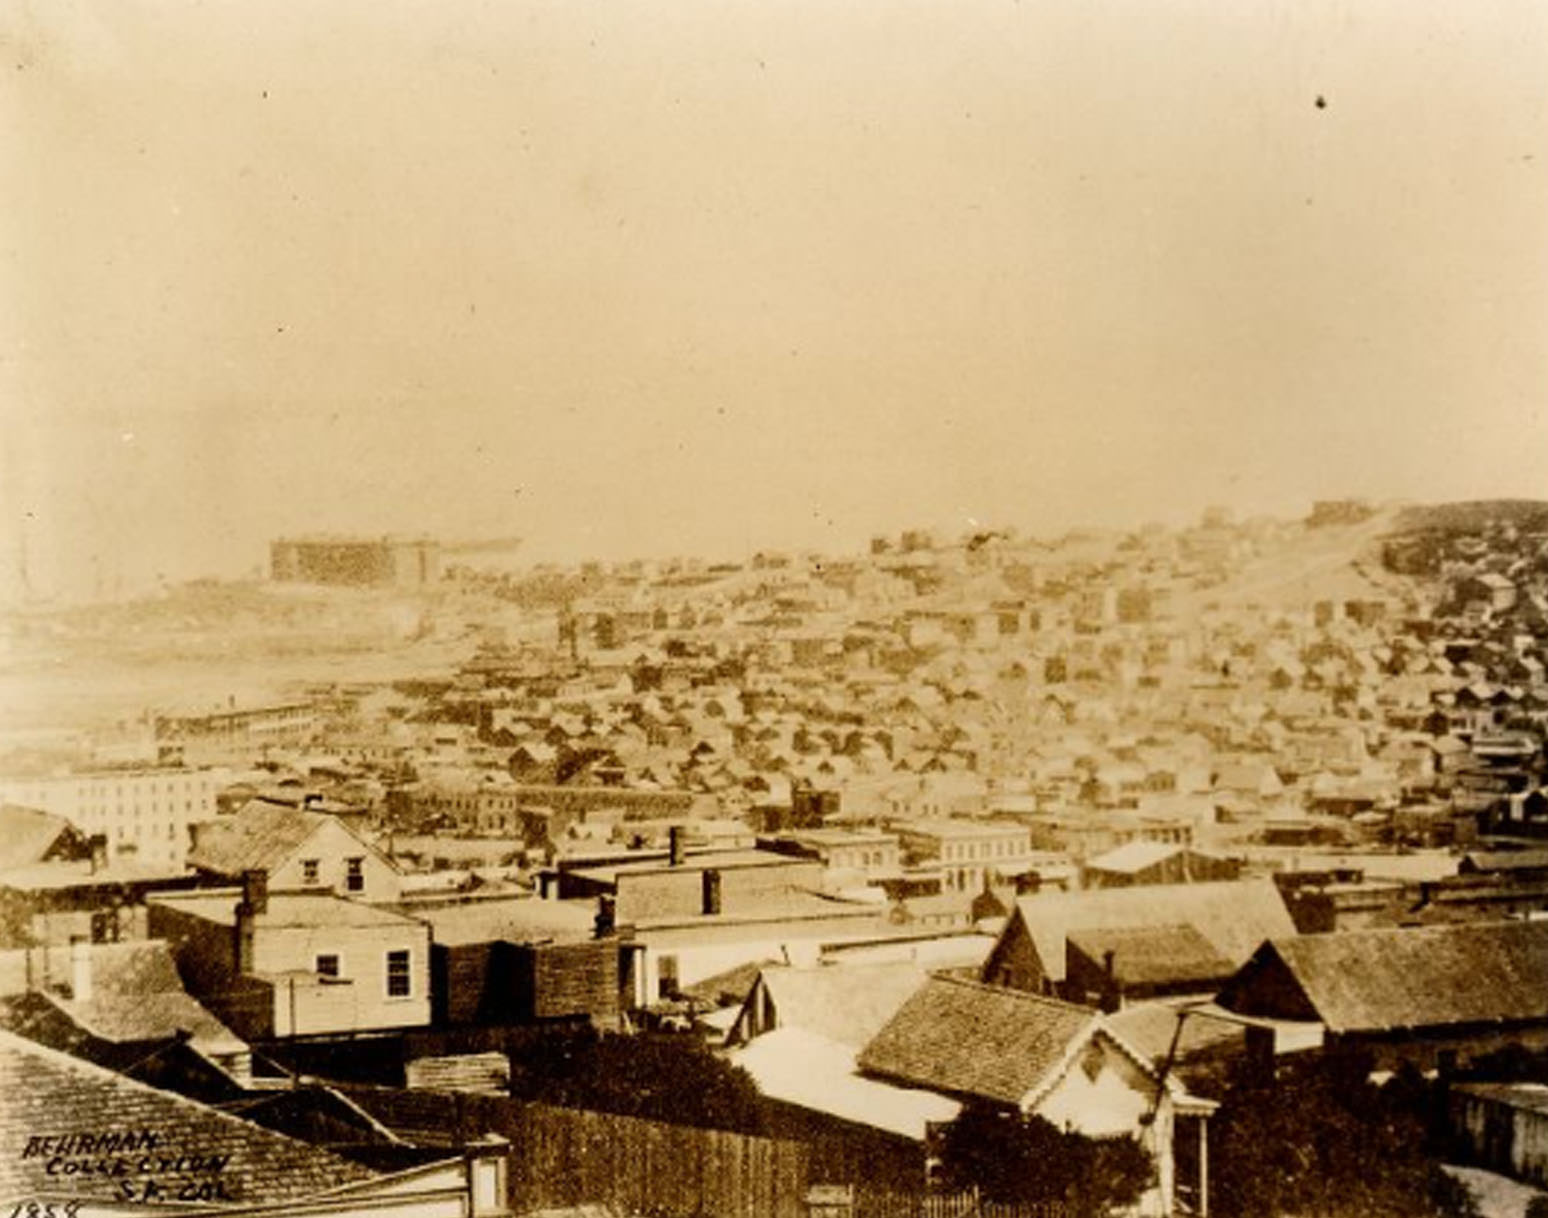 View from Sacramento and Taylor streets, 1858